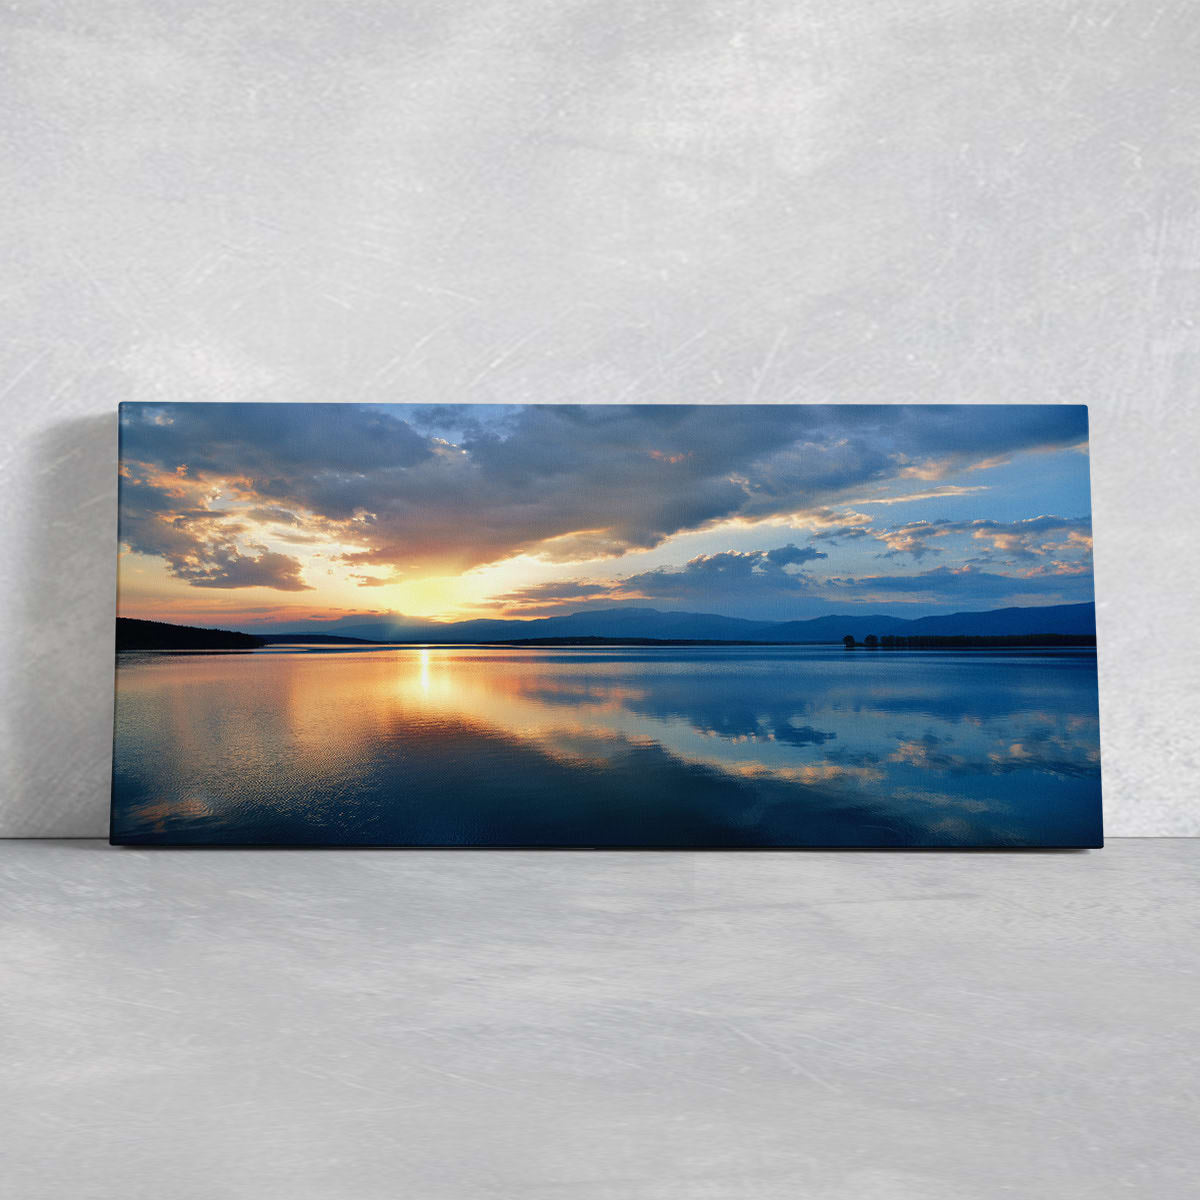 Relax Sunset On Stunning Canvas The Prints Lake by Canvas Art l Wall